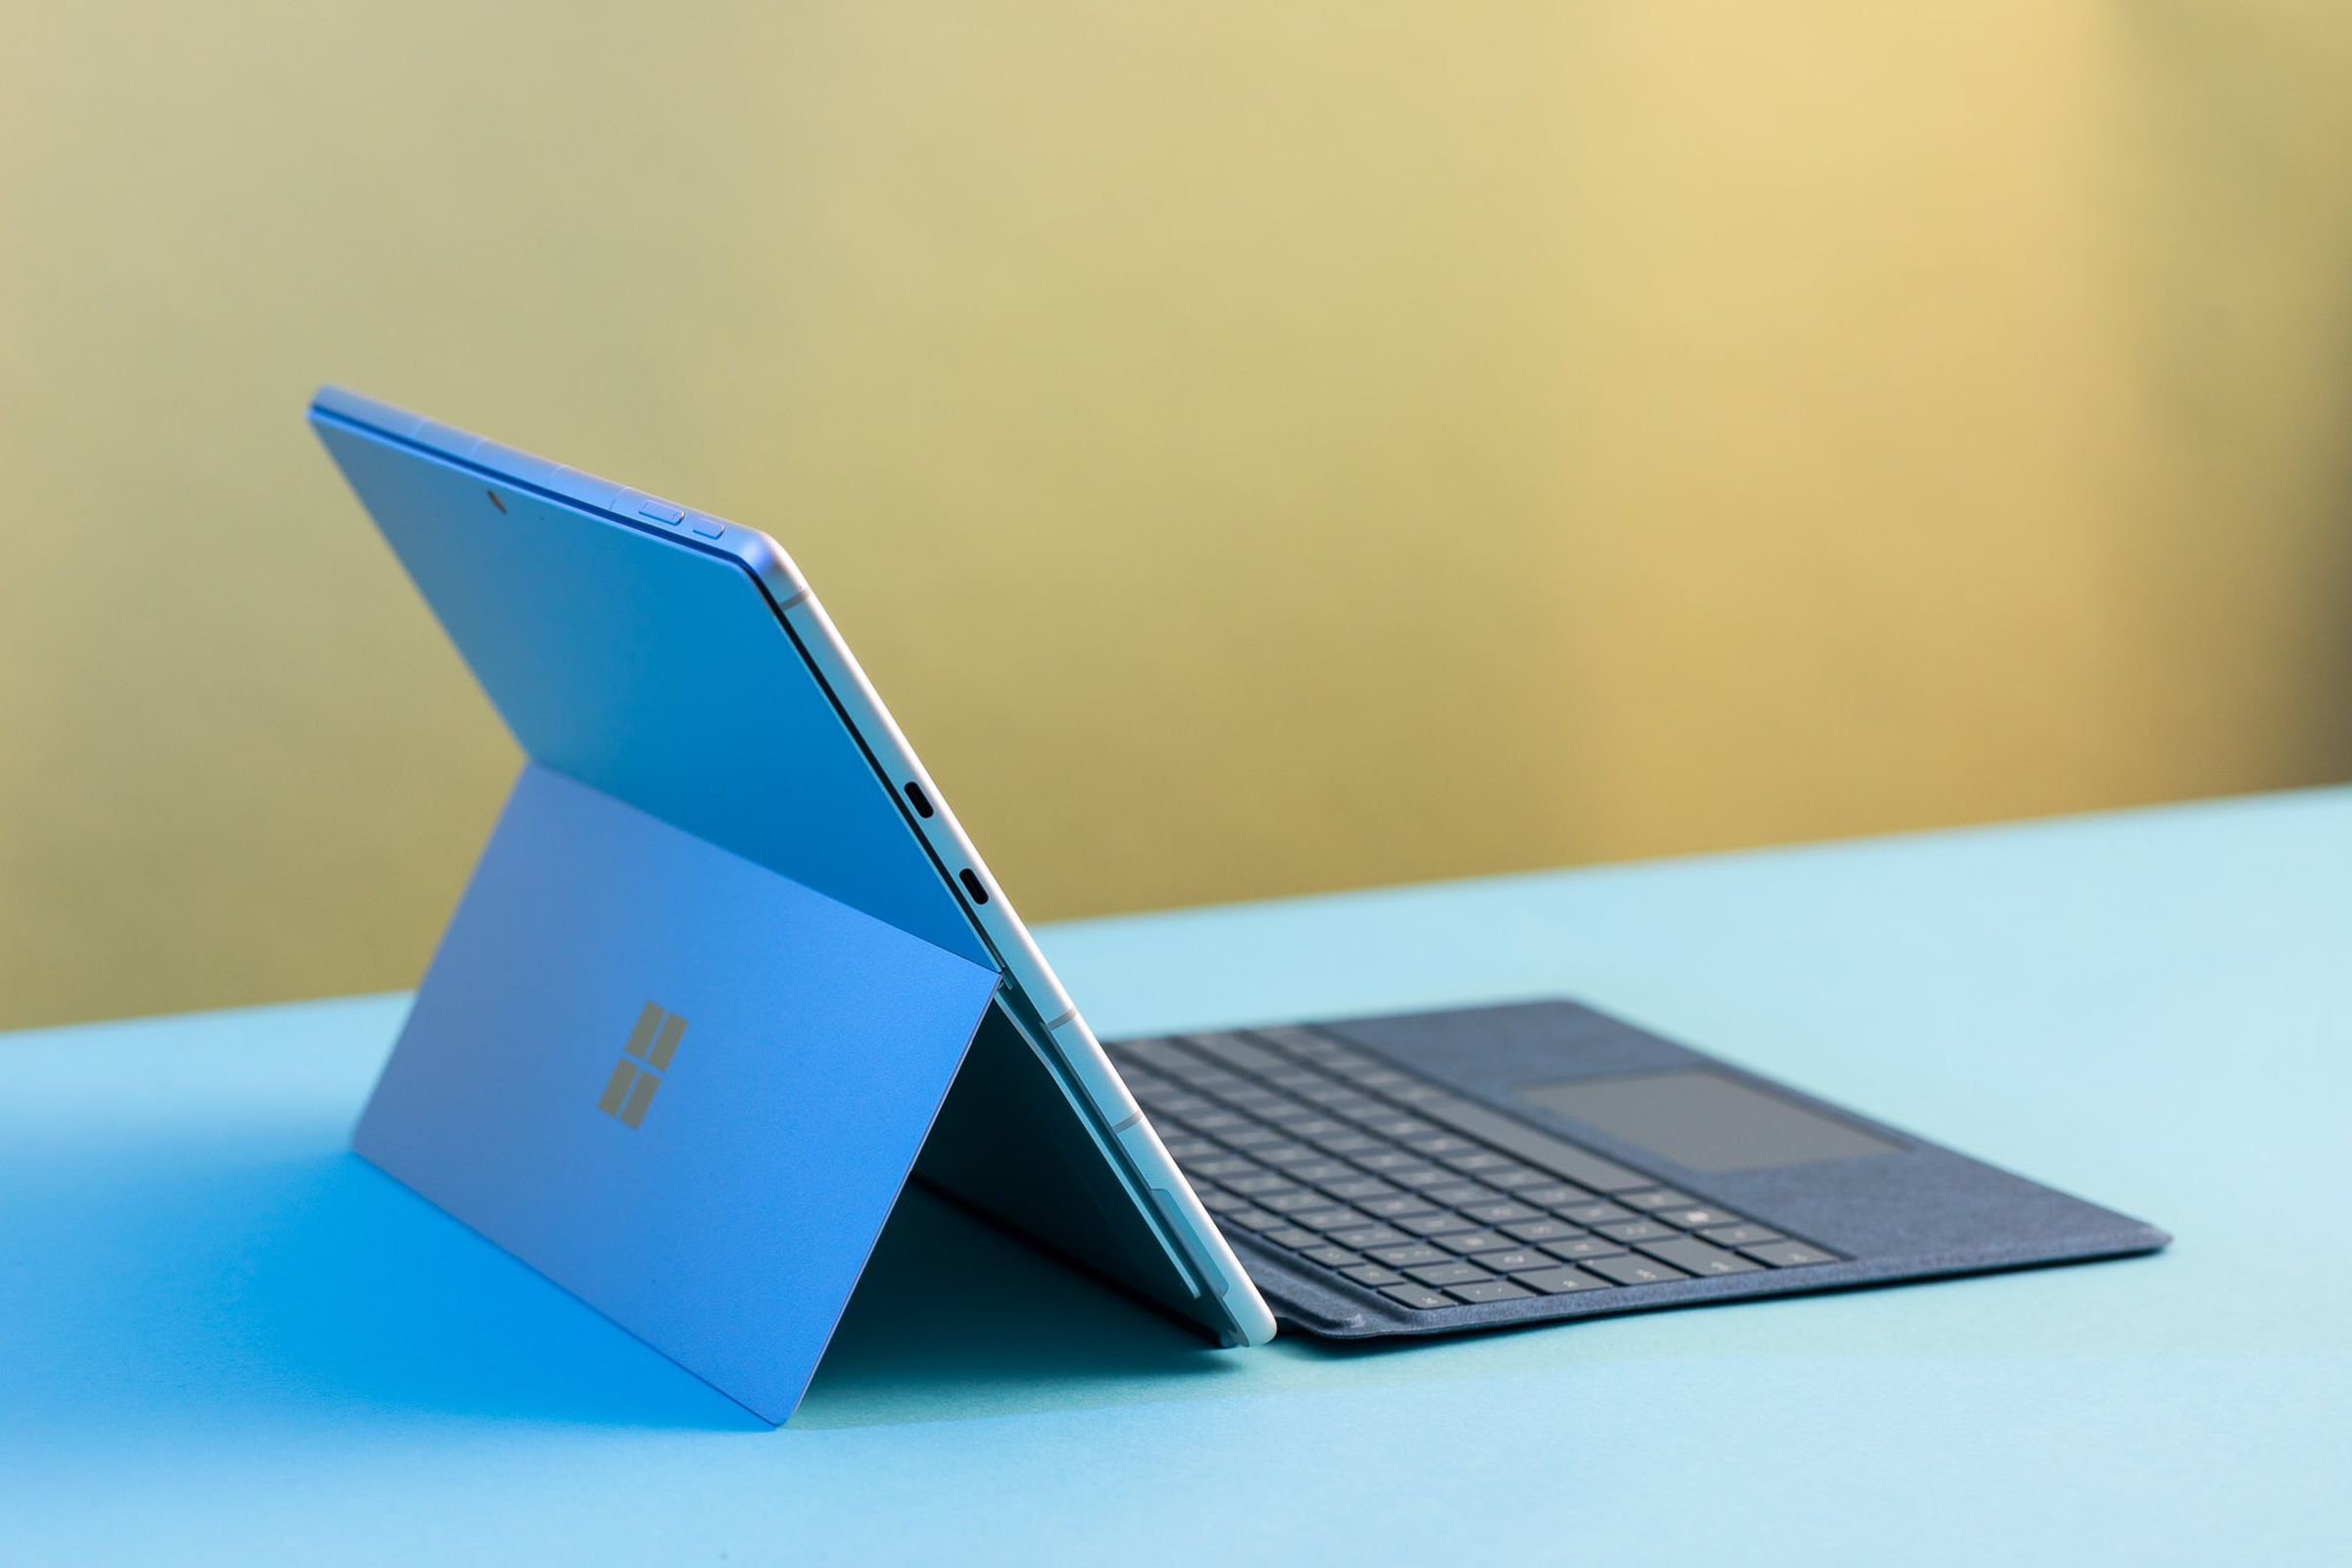 The Surface Pro 9 in laptop mode seen from behind.